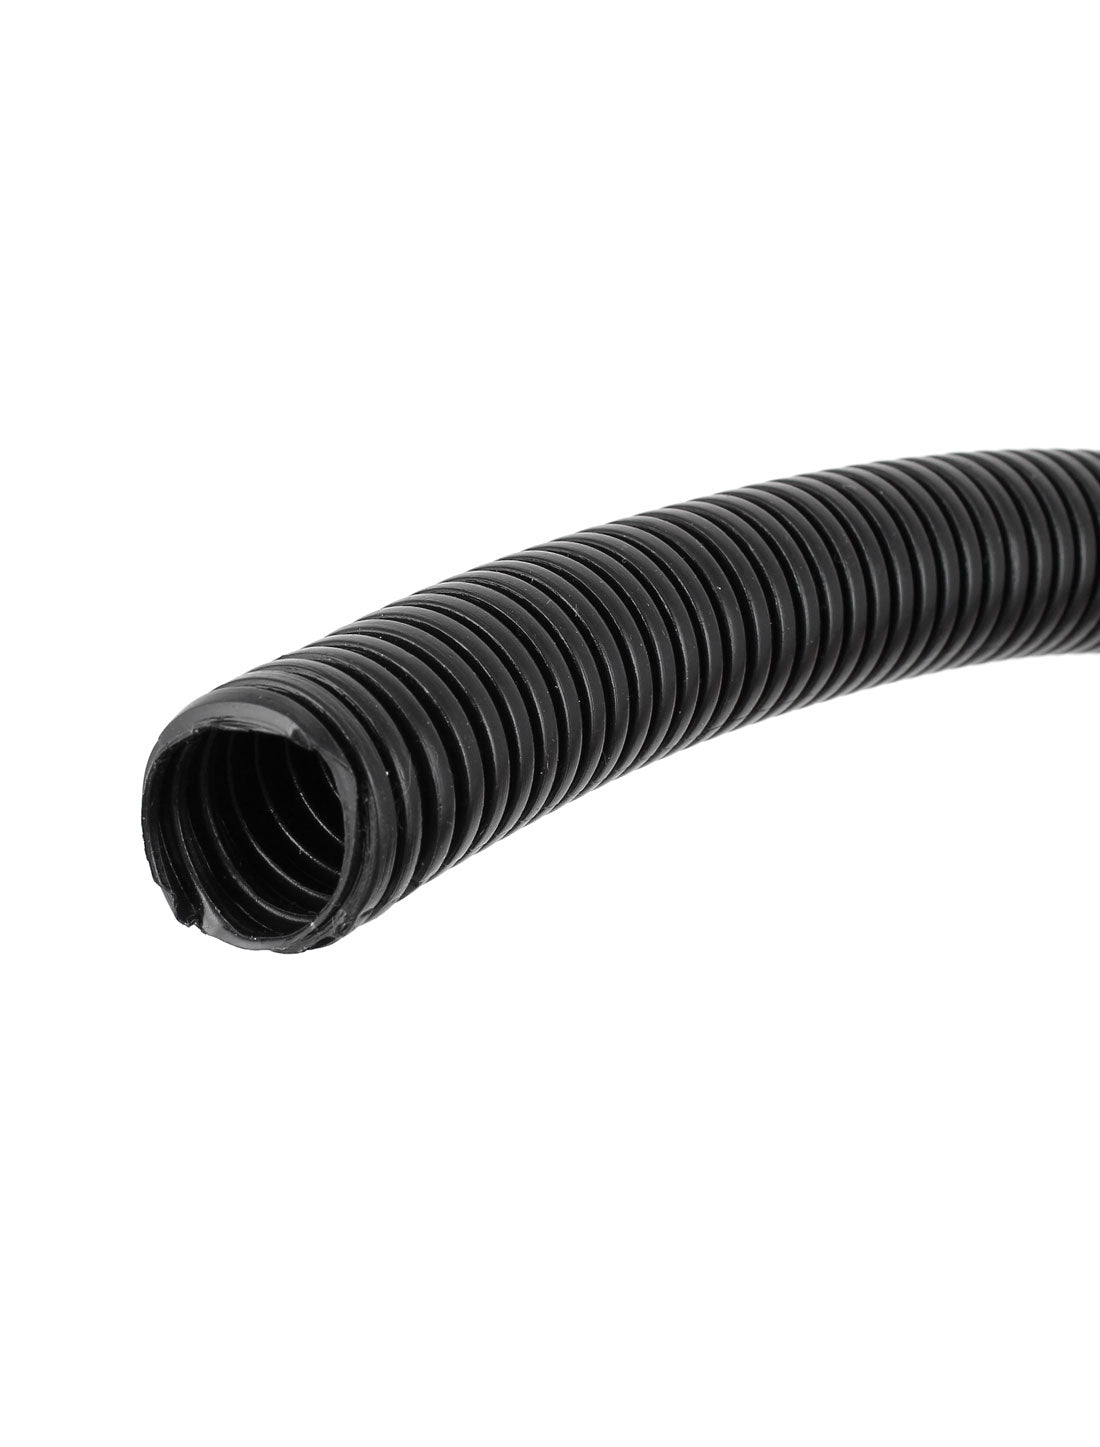 uxcell Uxcell 3.7 M 20 x 25 mm Plastic Corrugated Conduit Tube for Garden,Office Black